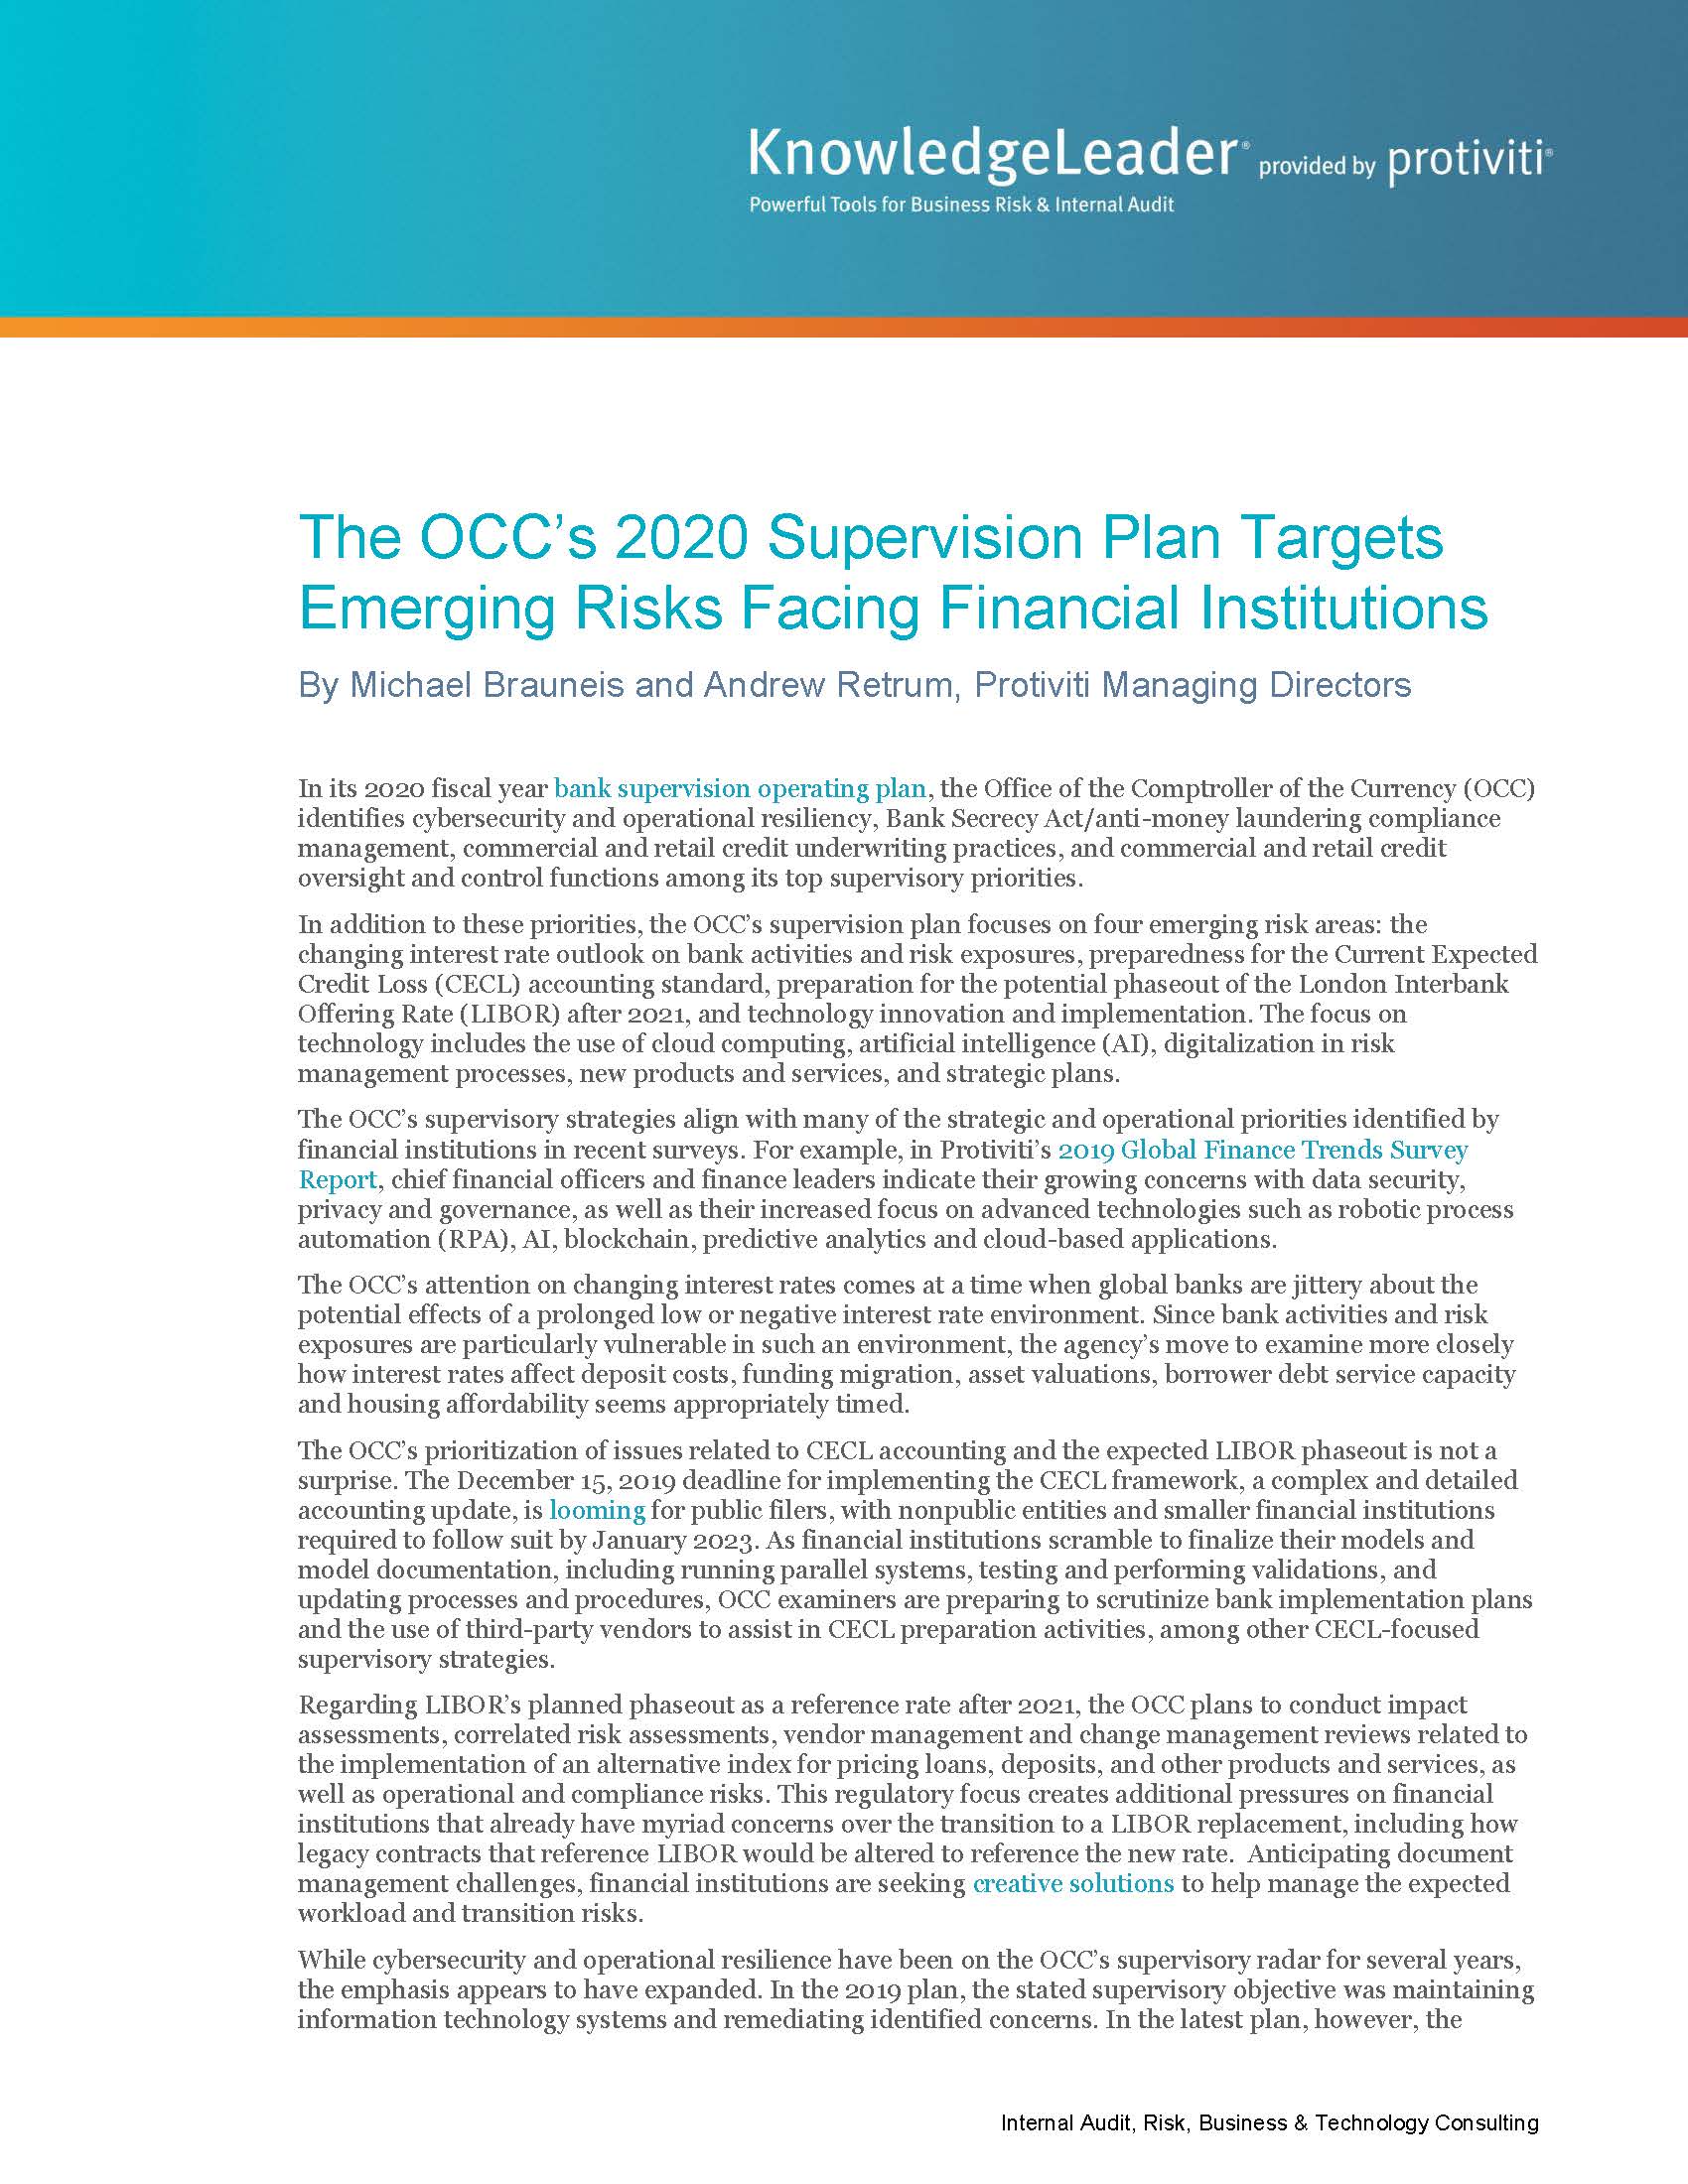 Screenshot of the first page of The OCC’s 2020 Supervision Plan Targets Emerging Risks Facing Financial Institutions